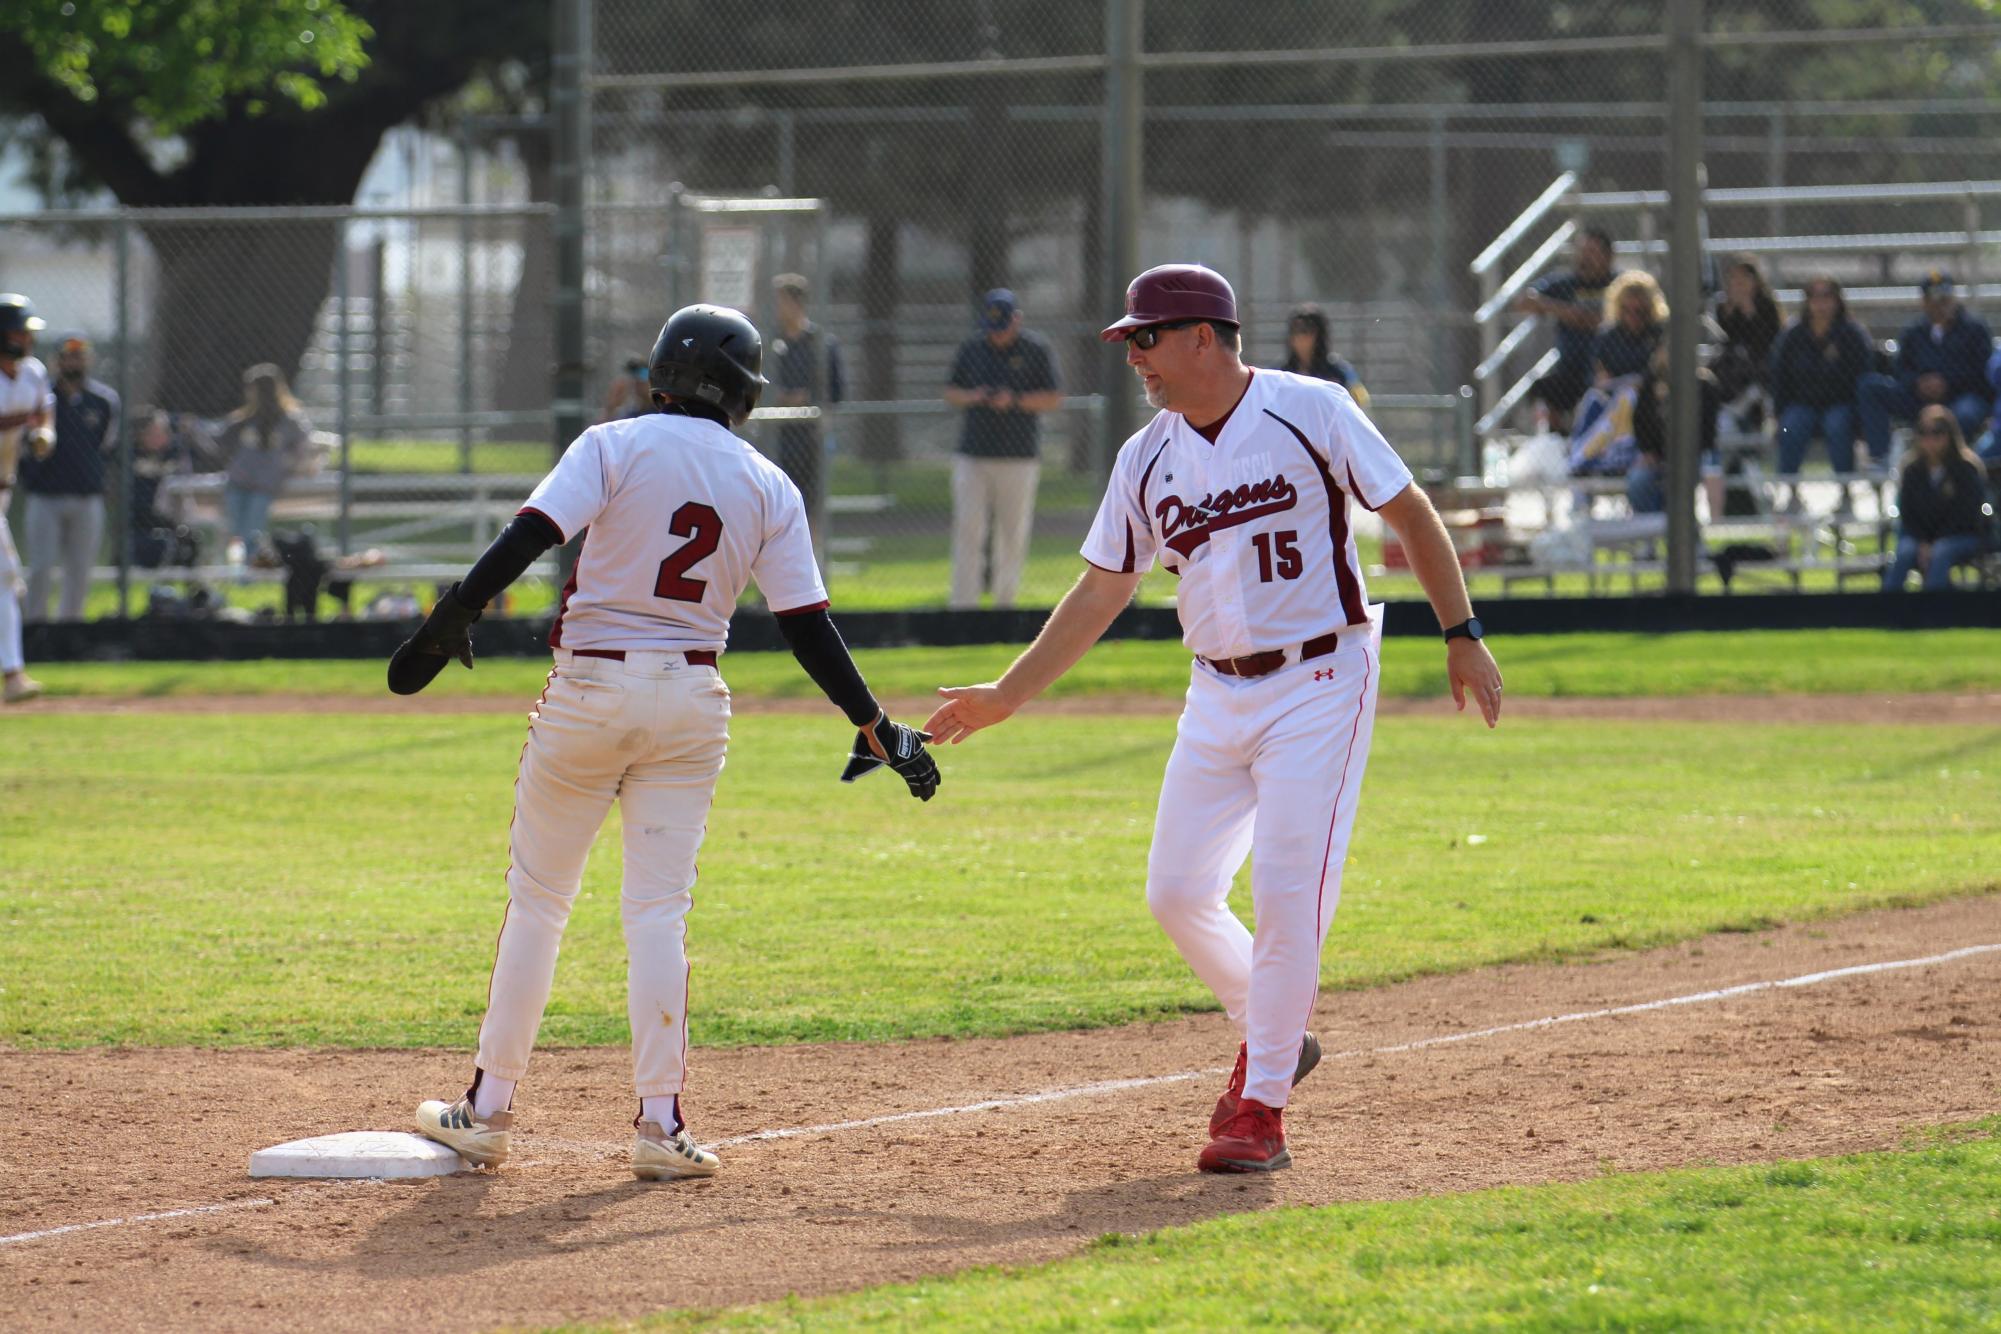 Aidan Gomez delivers stolen bases and homer as Foothill Tech bows to Mary Star in CIF opener